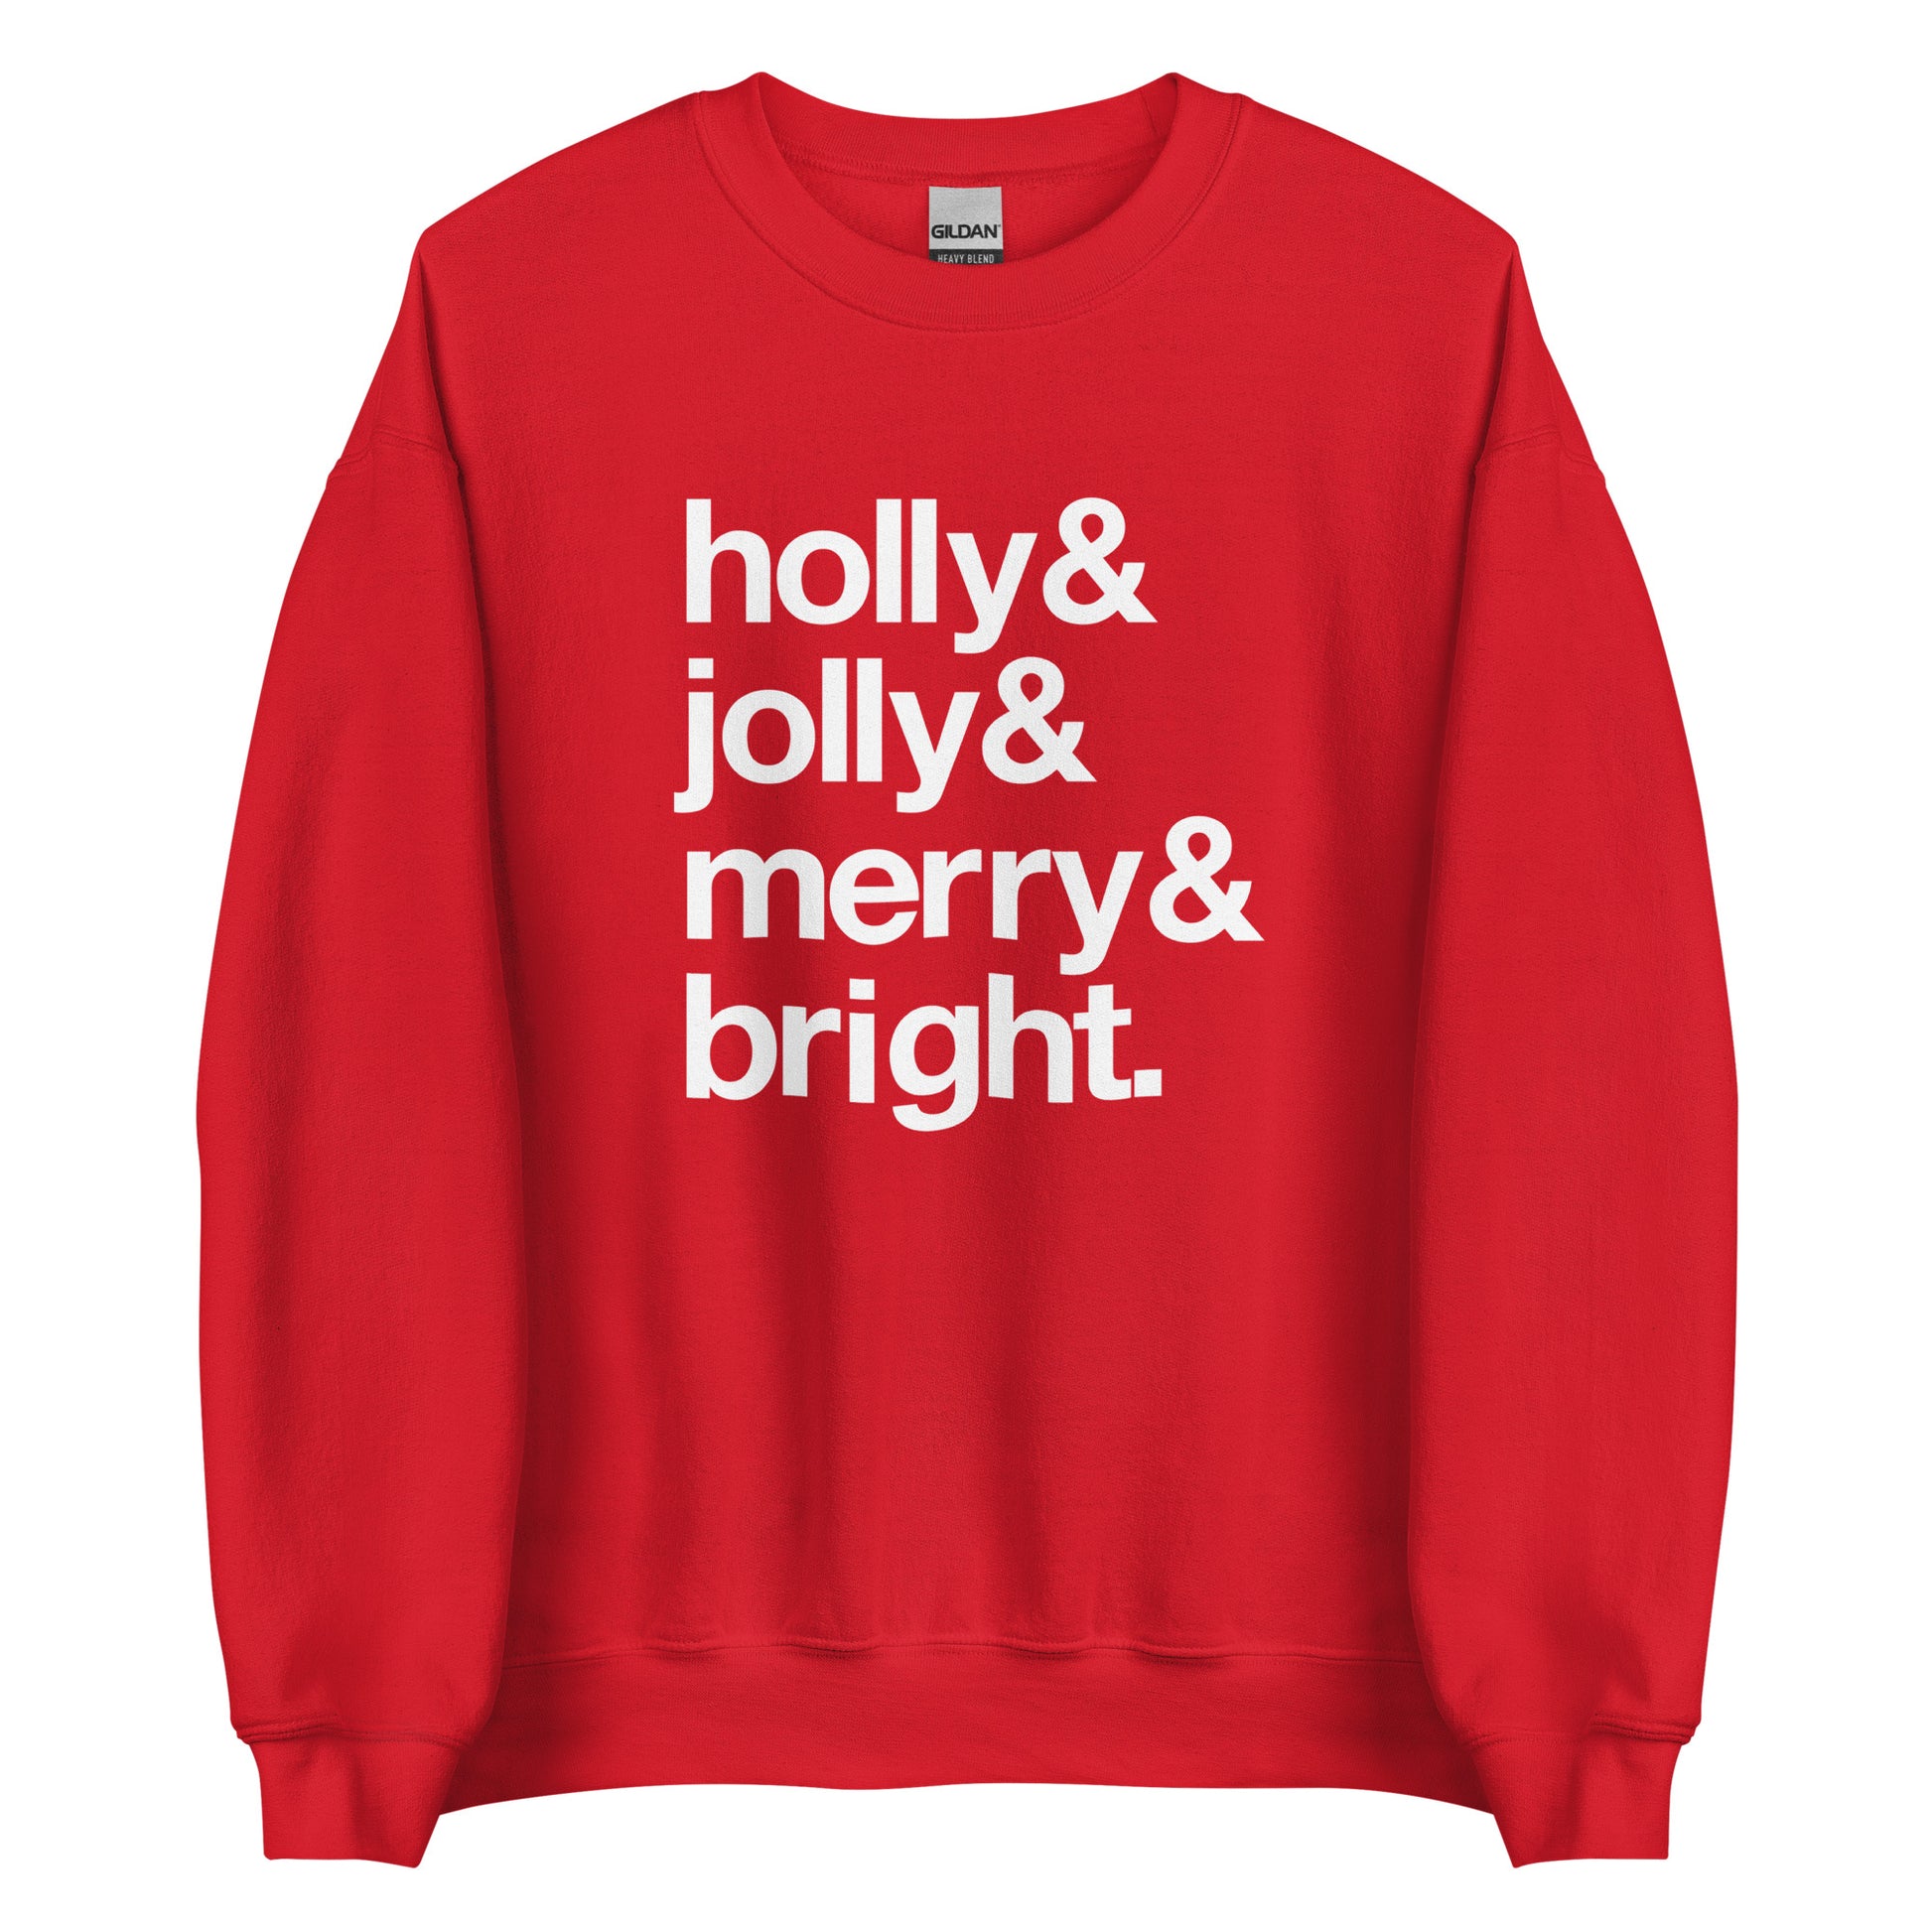 A red crewneck sweatshirt featuring four lines of white text that read "Holly & jolly & merry & bright"